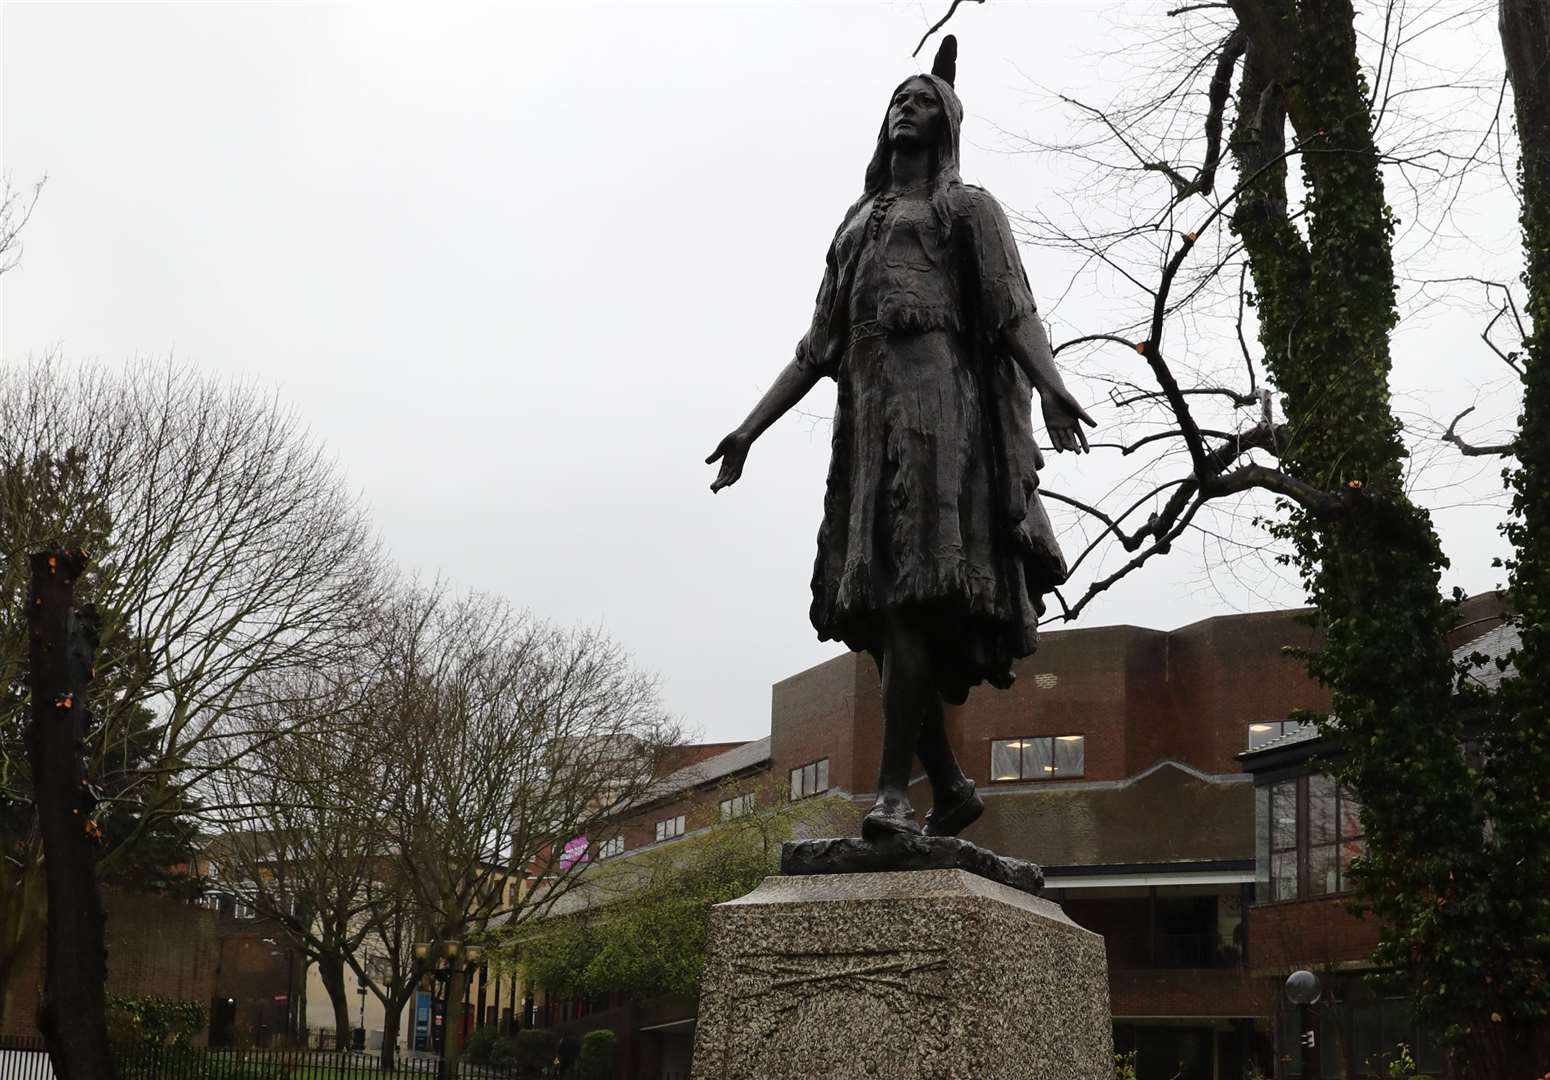 Pocahontas is remembered in Gravesend